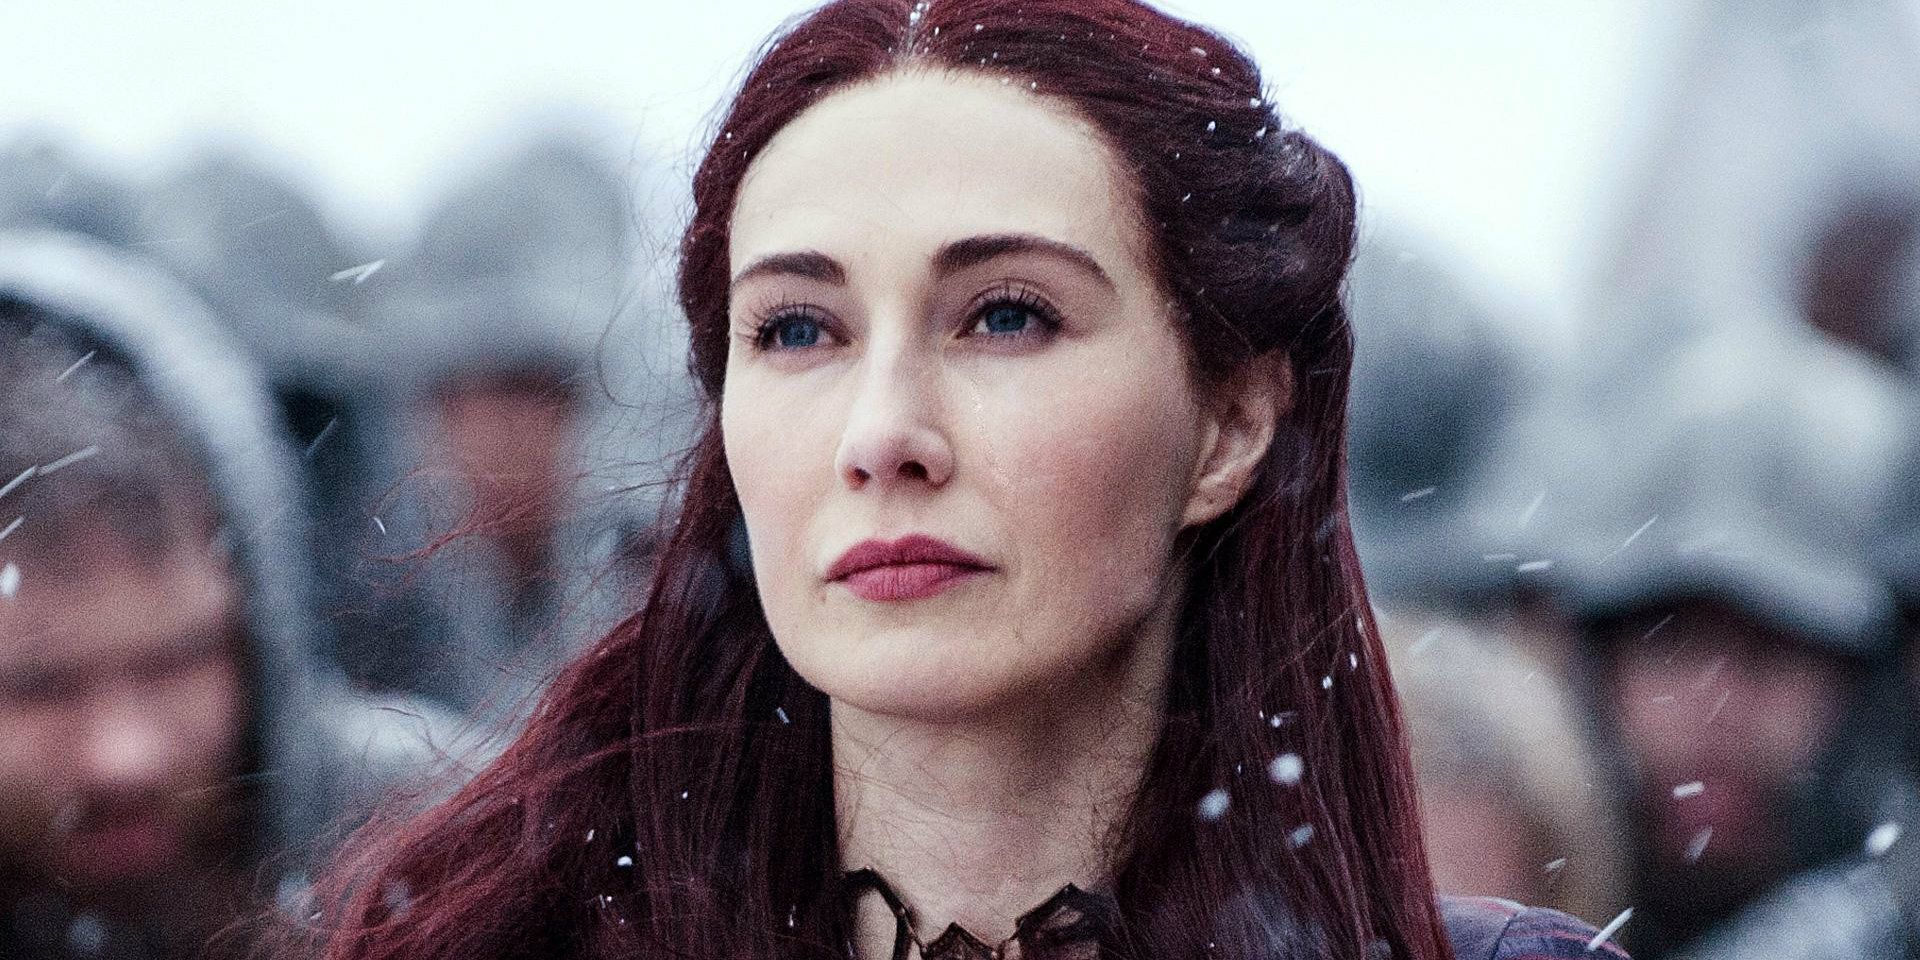 Melisandre waiting in front of soldiers